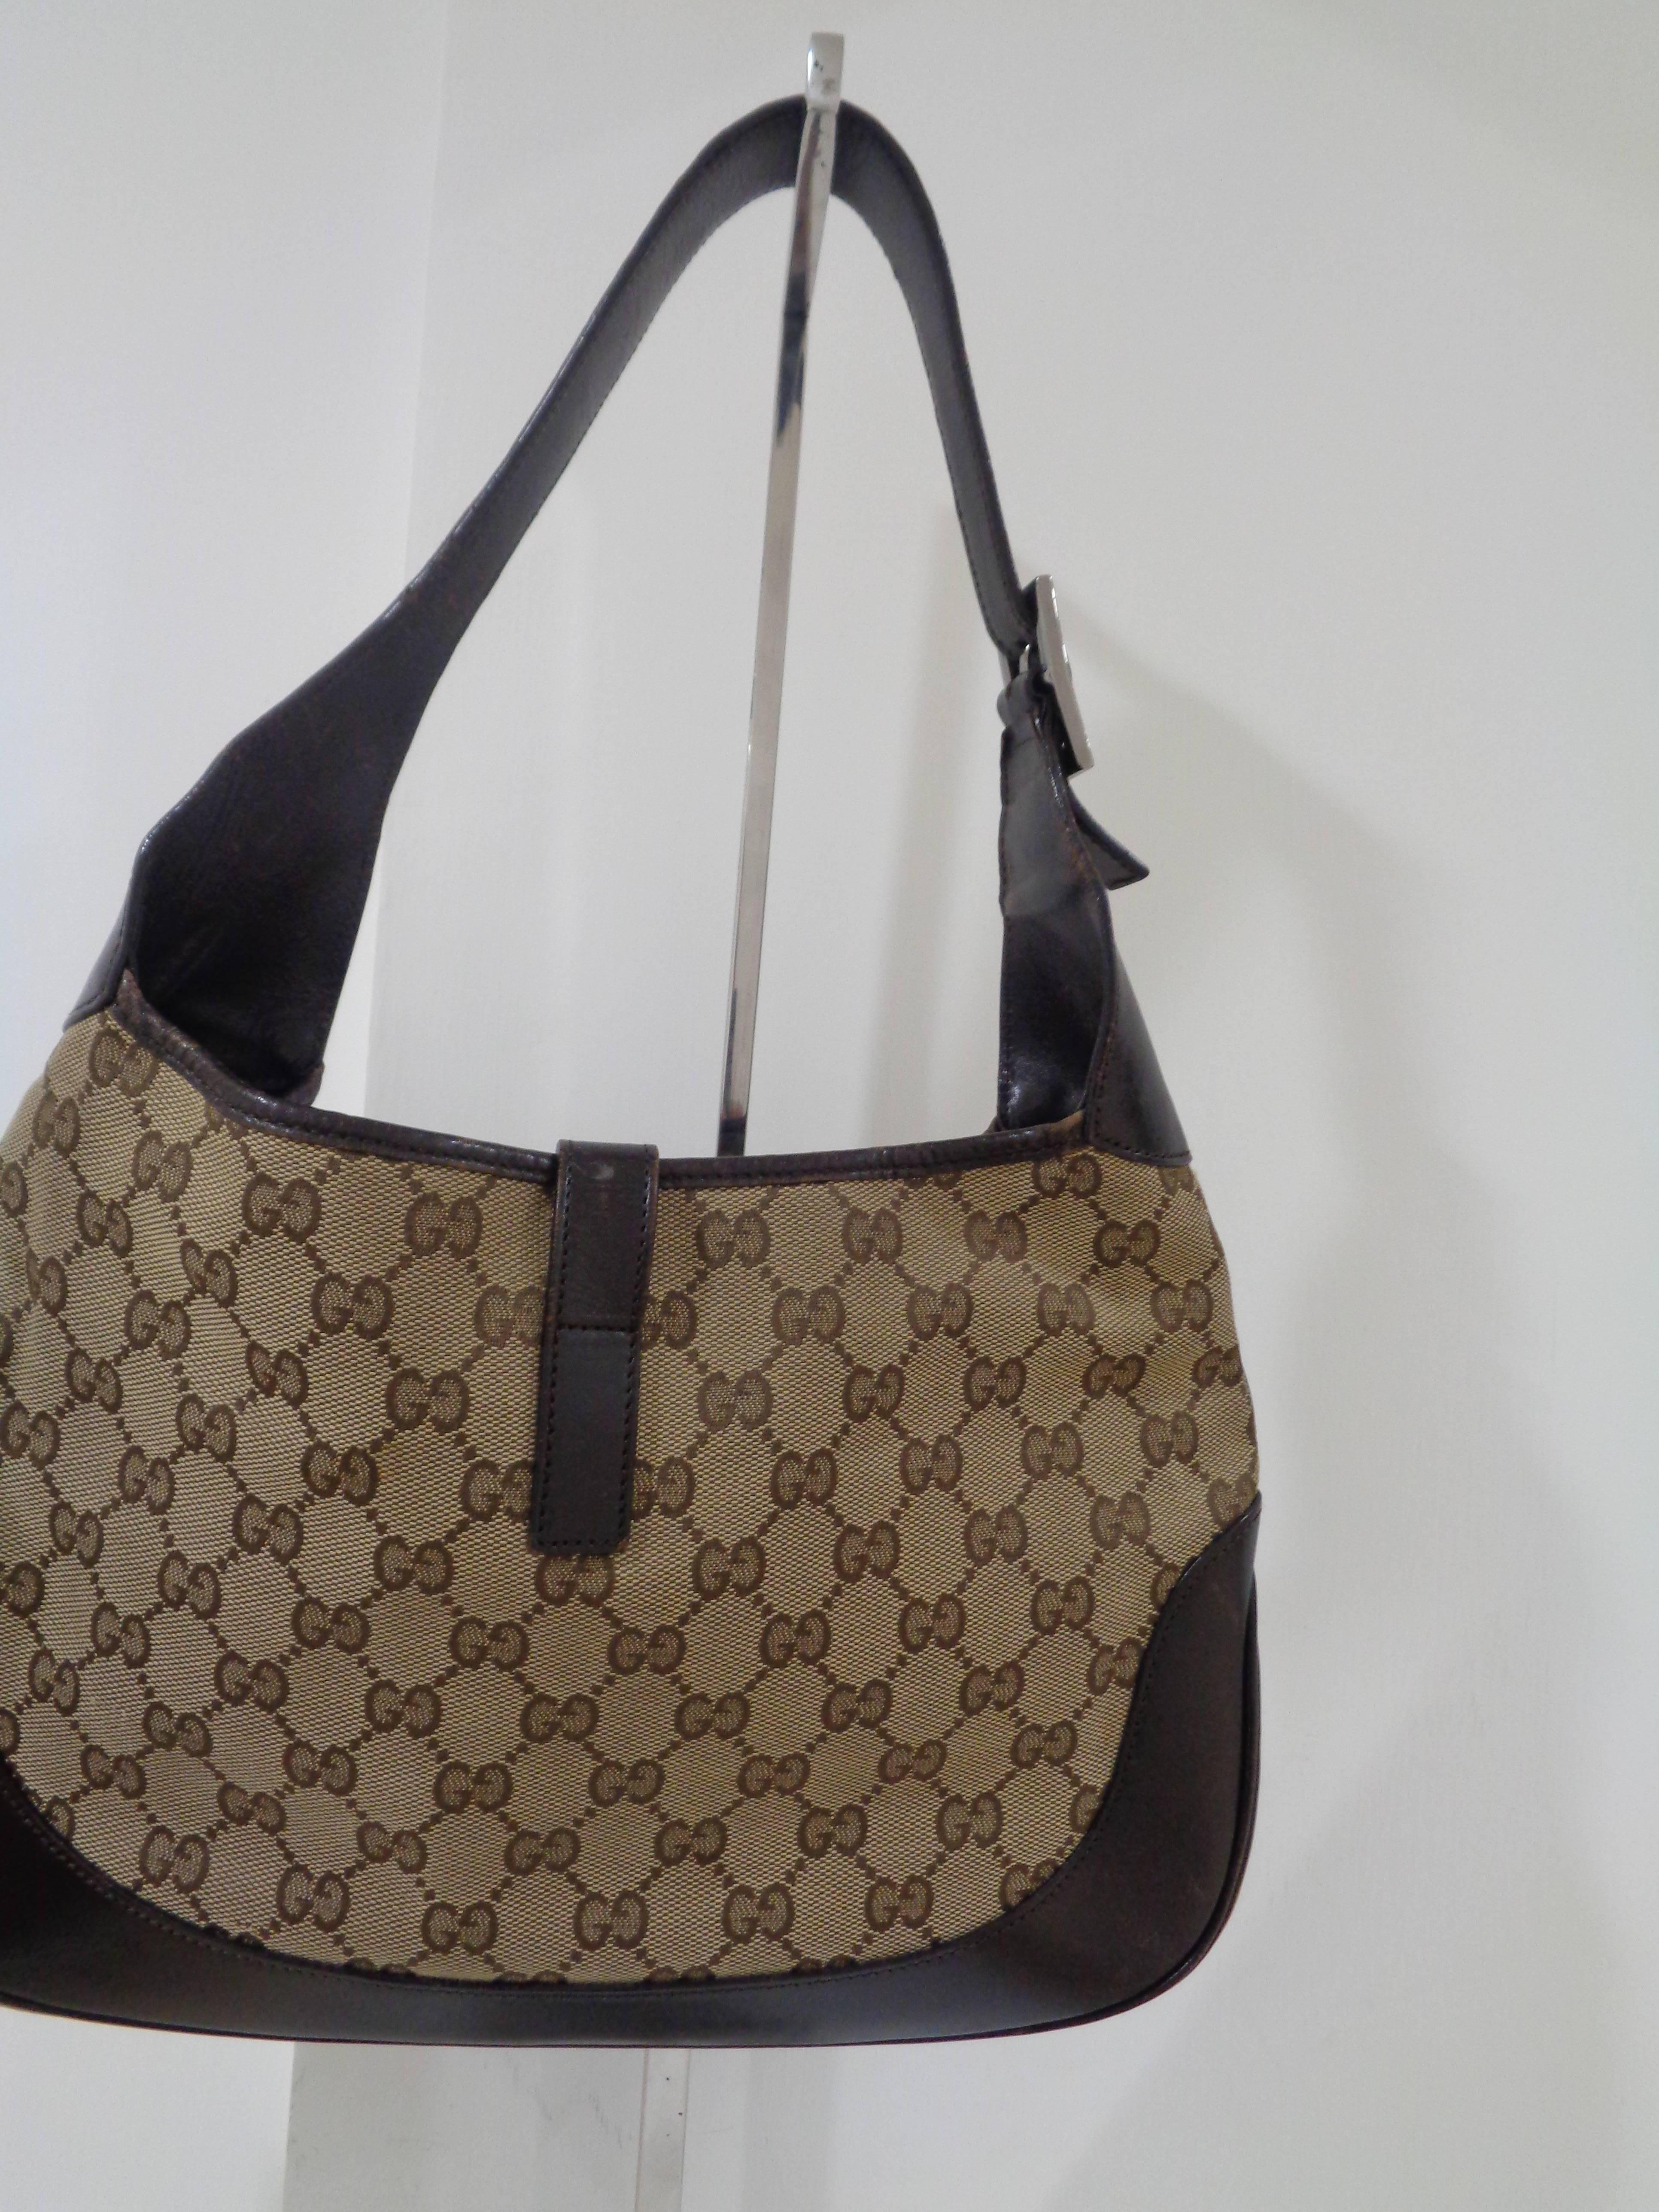 Women's or Men's Gucci GG logo brown leather jackie bag